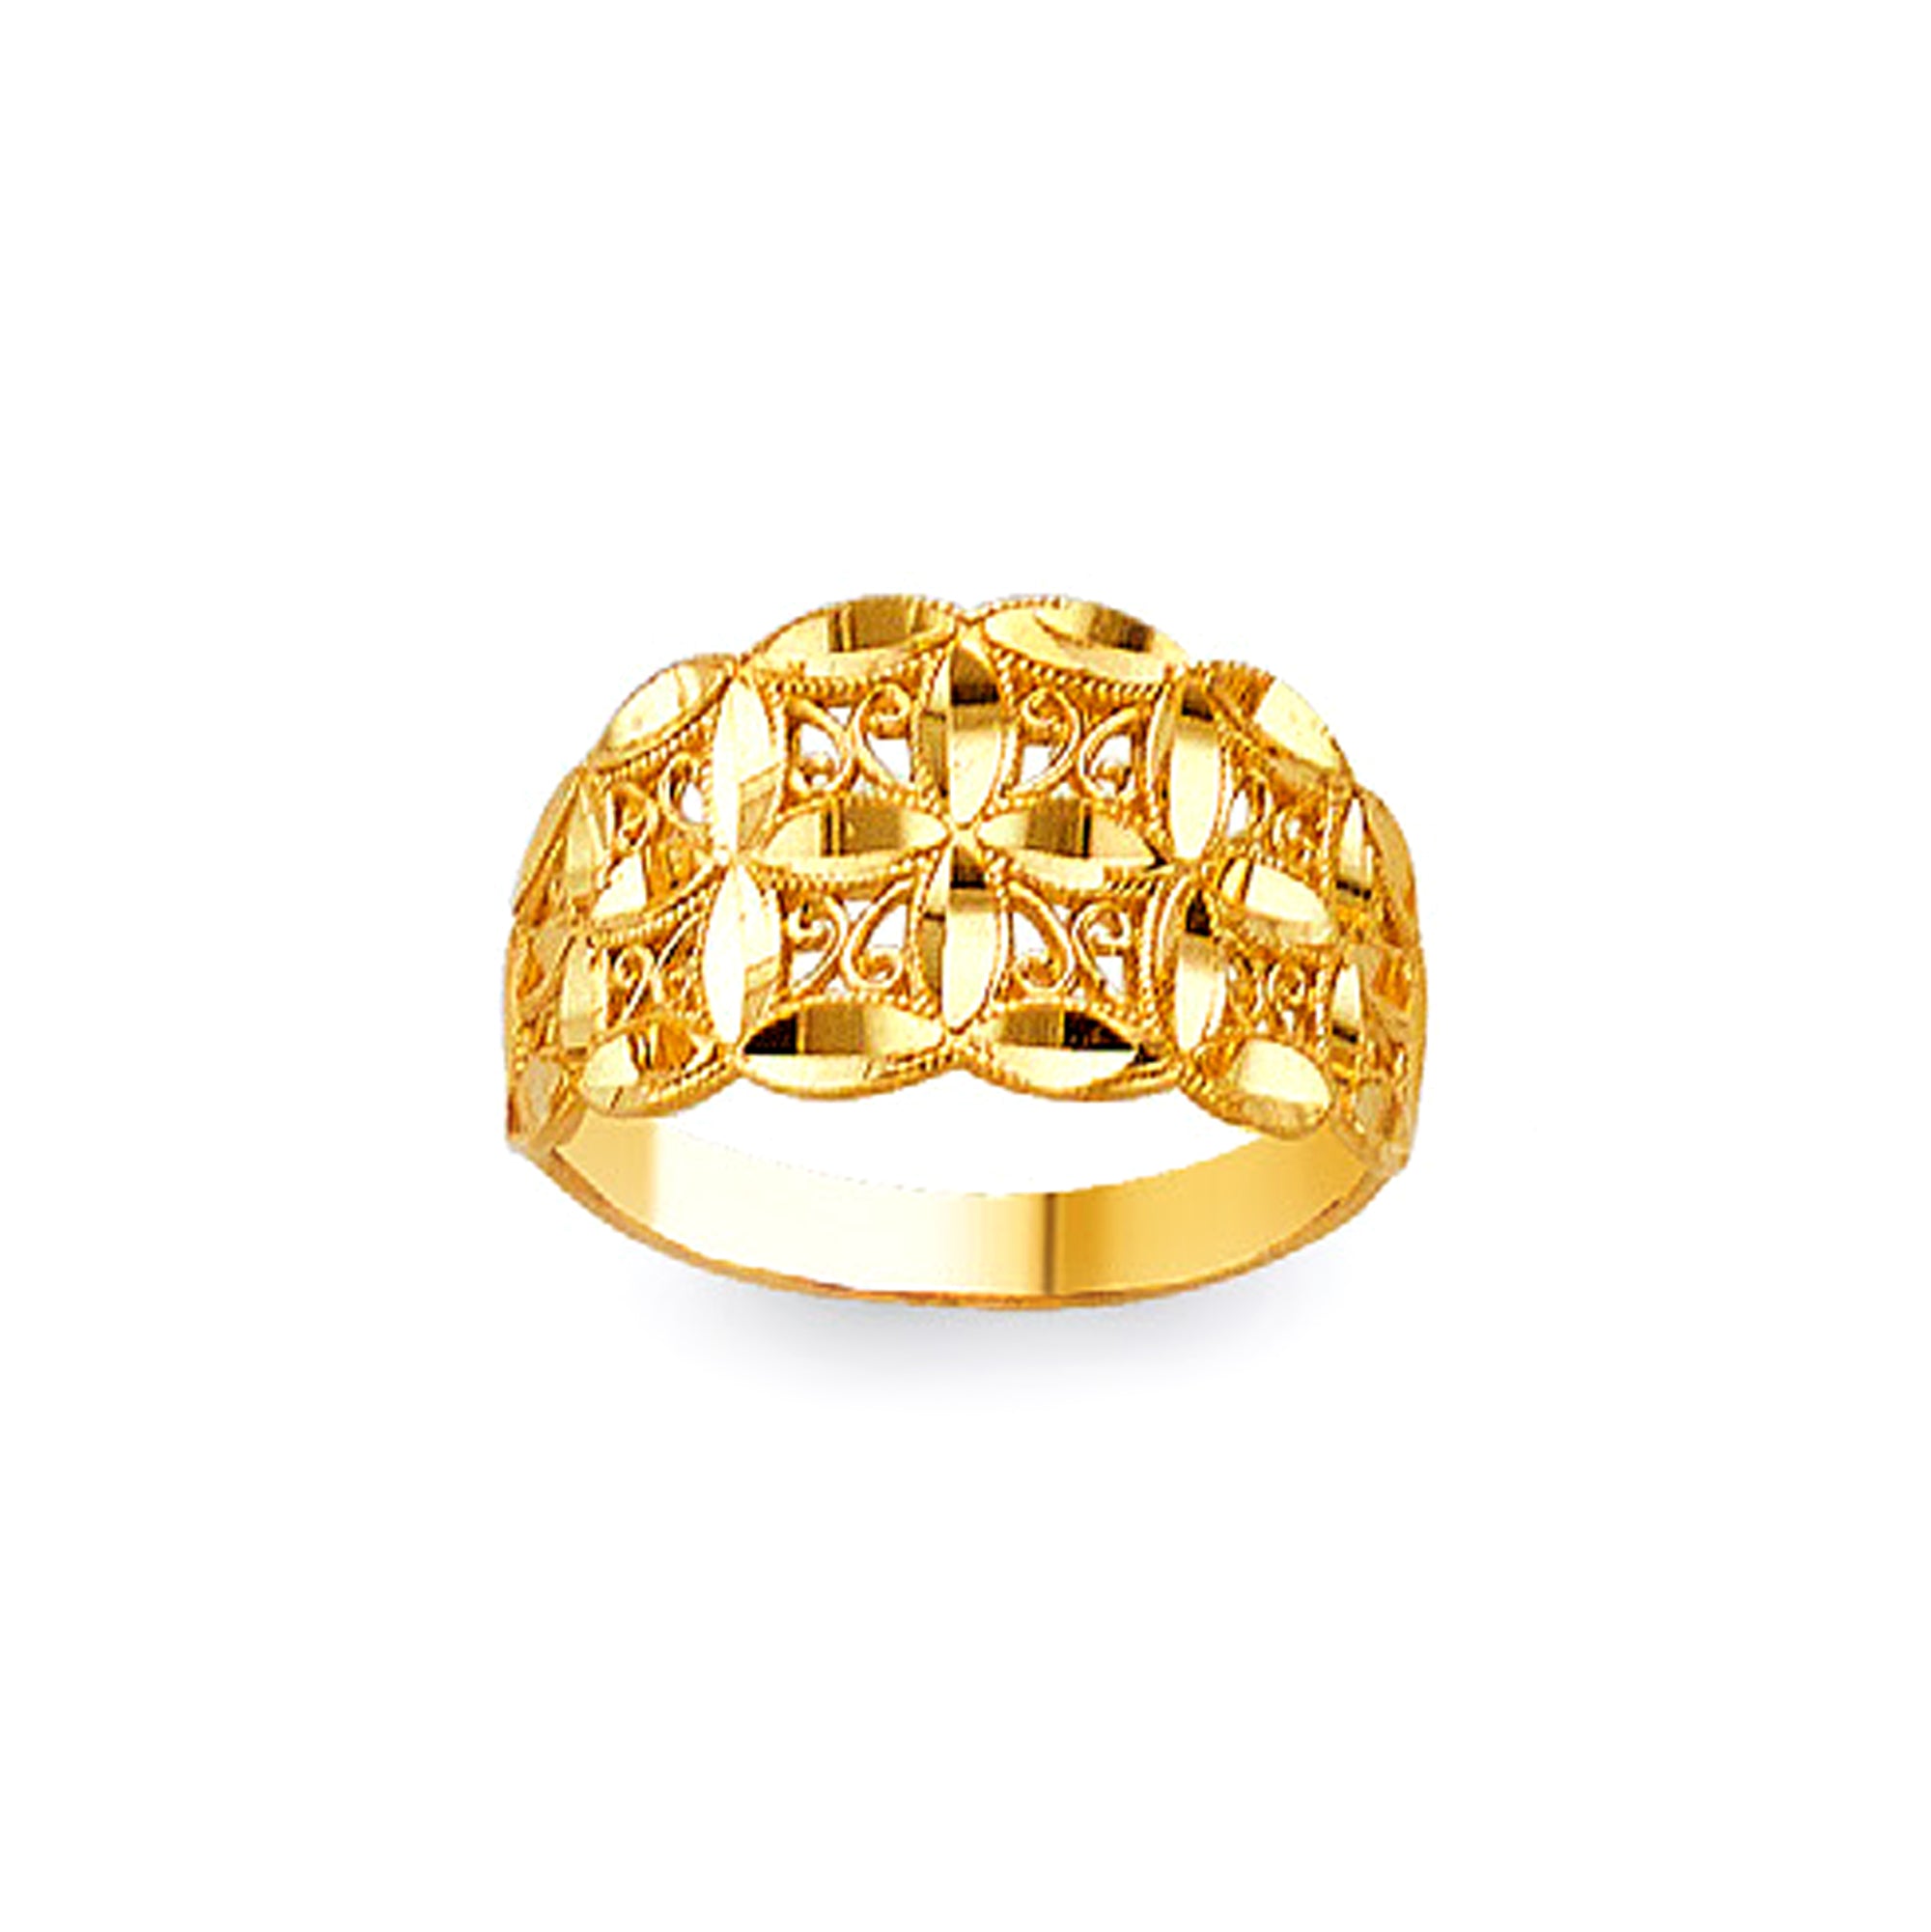 Intricate Heart Ring in Solid Gold 